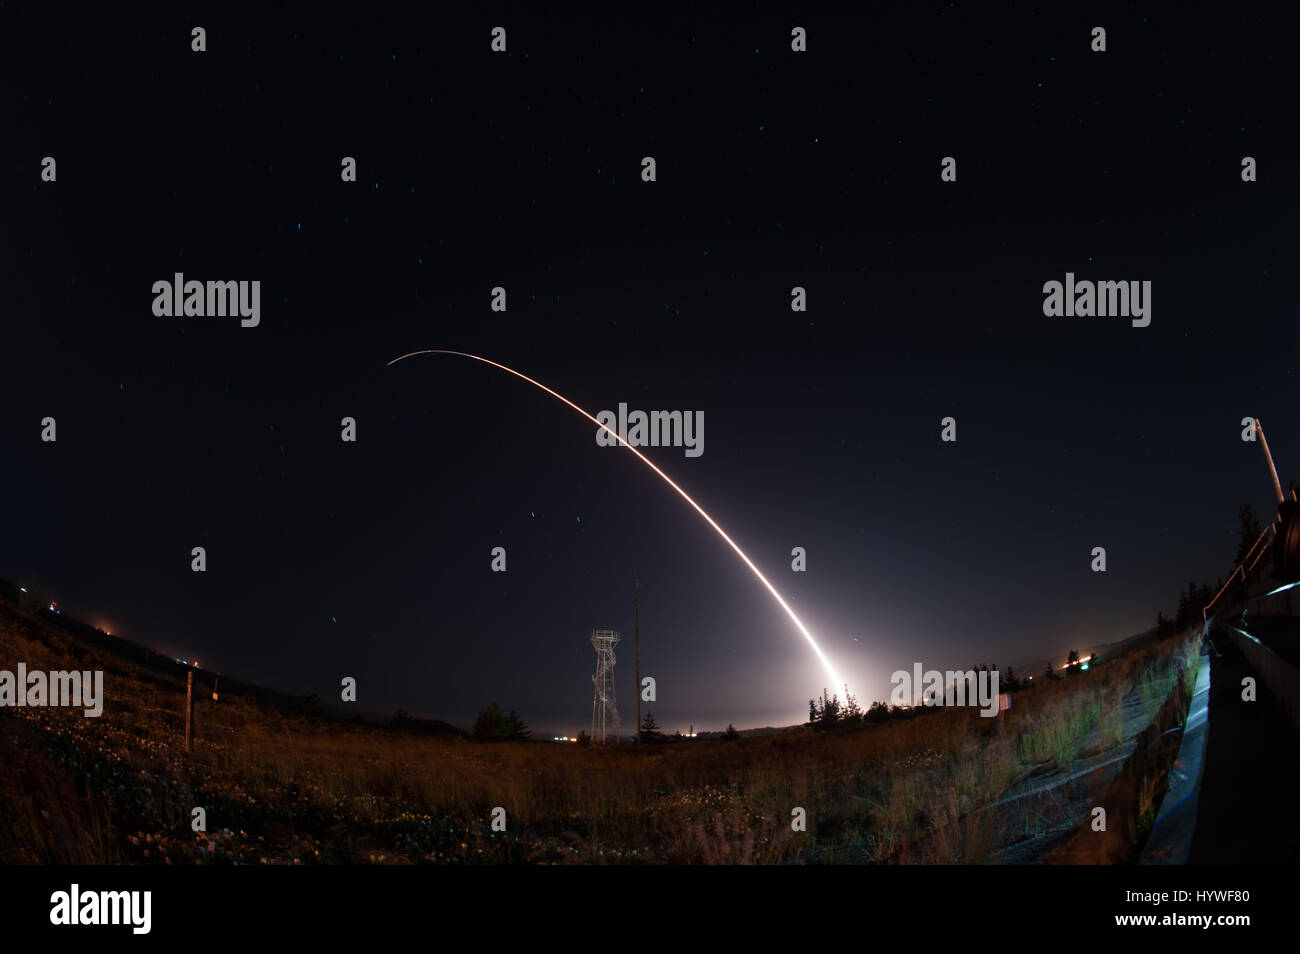 Air Force Global Strike Command Minuteman III intercontinental ballistic missile with a simulated warhead is launched during an operational test at Vandenberg Air Force Base April 26, 2017 Vandenberg, California. The test comes during increased tensions with North Korea. Credit: Planetpix/Alamy Live News Stock Photo